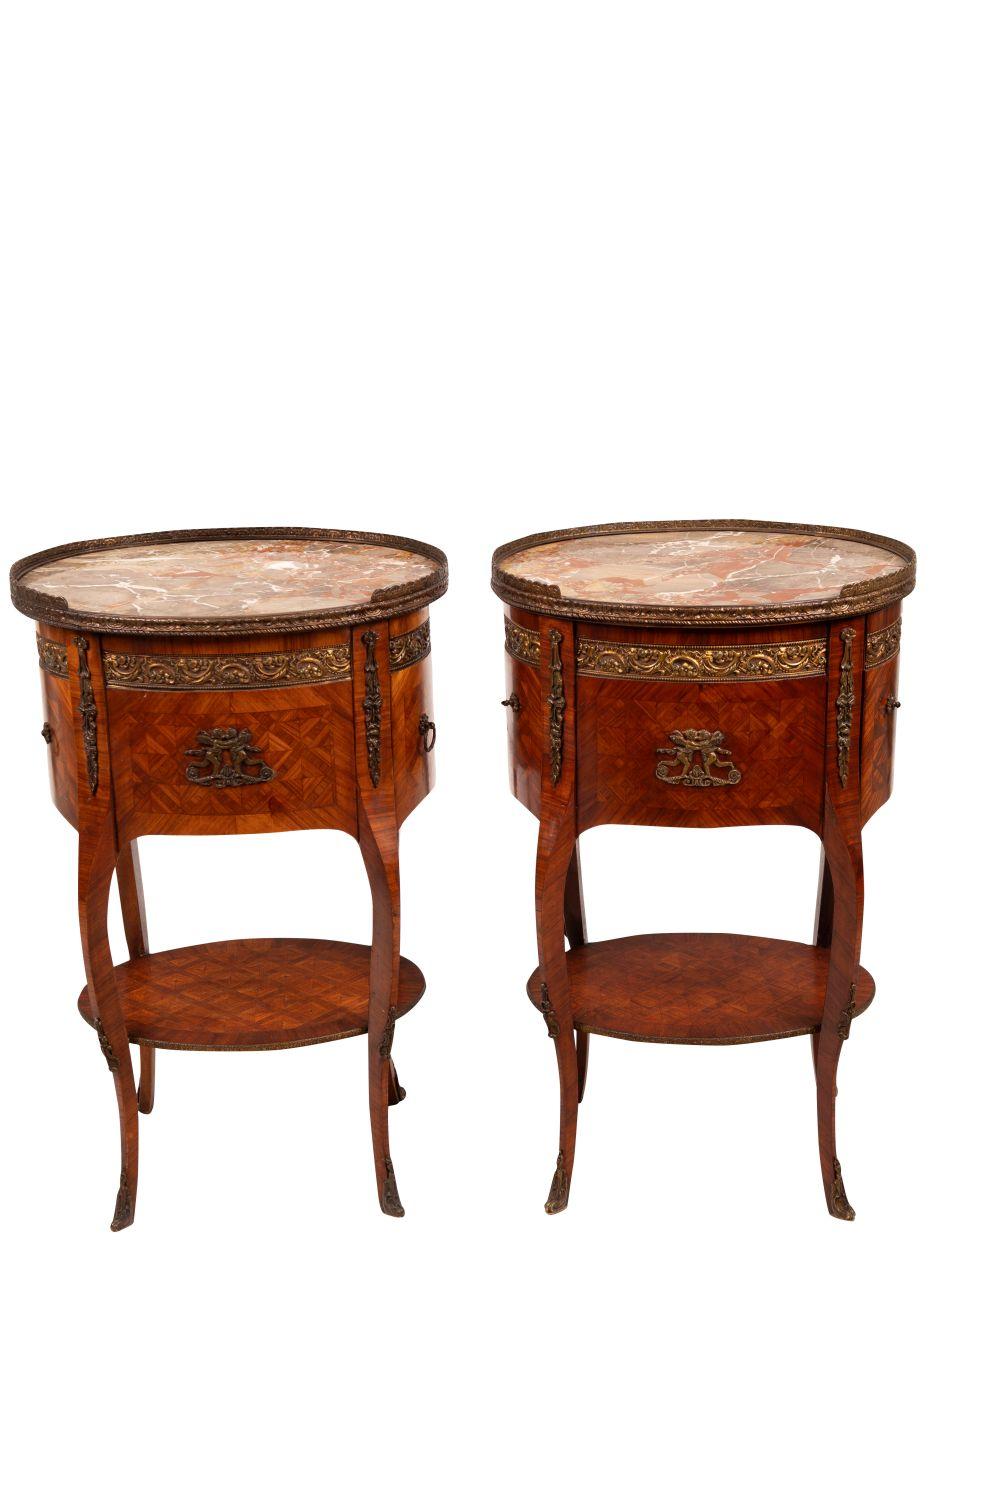 PAIR OF FRENCH PARQUETRY & MARBLE